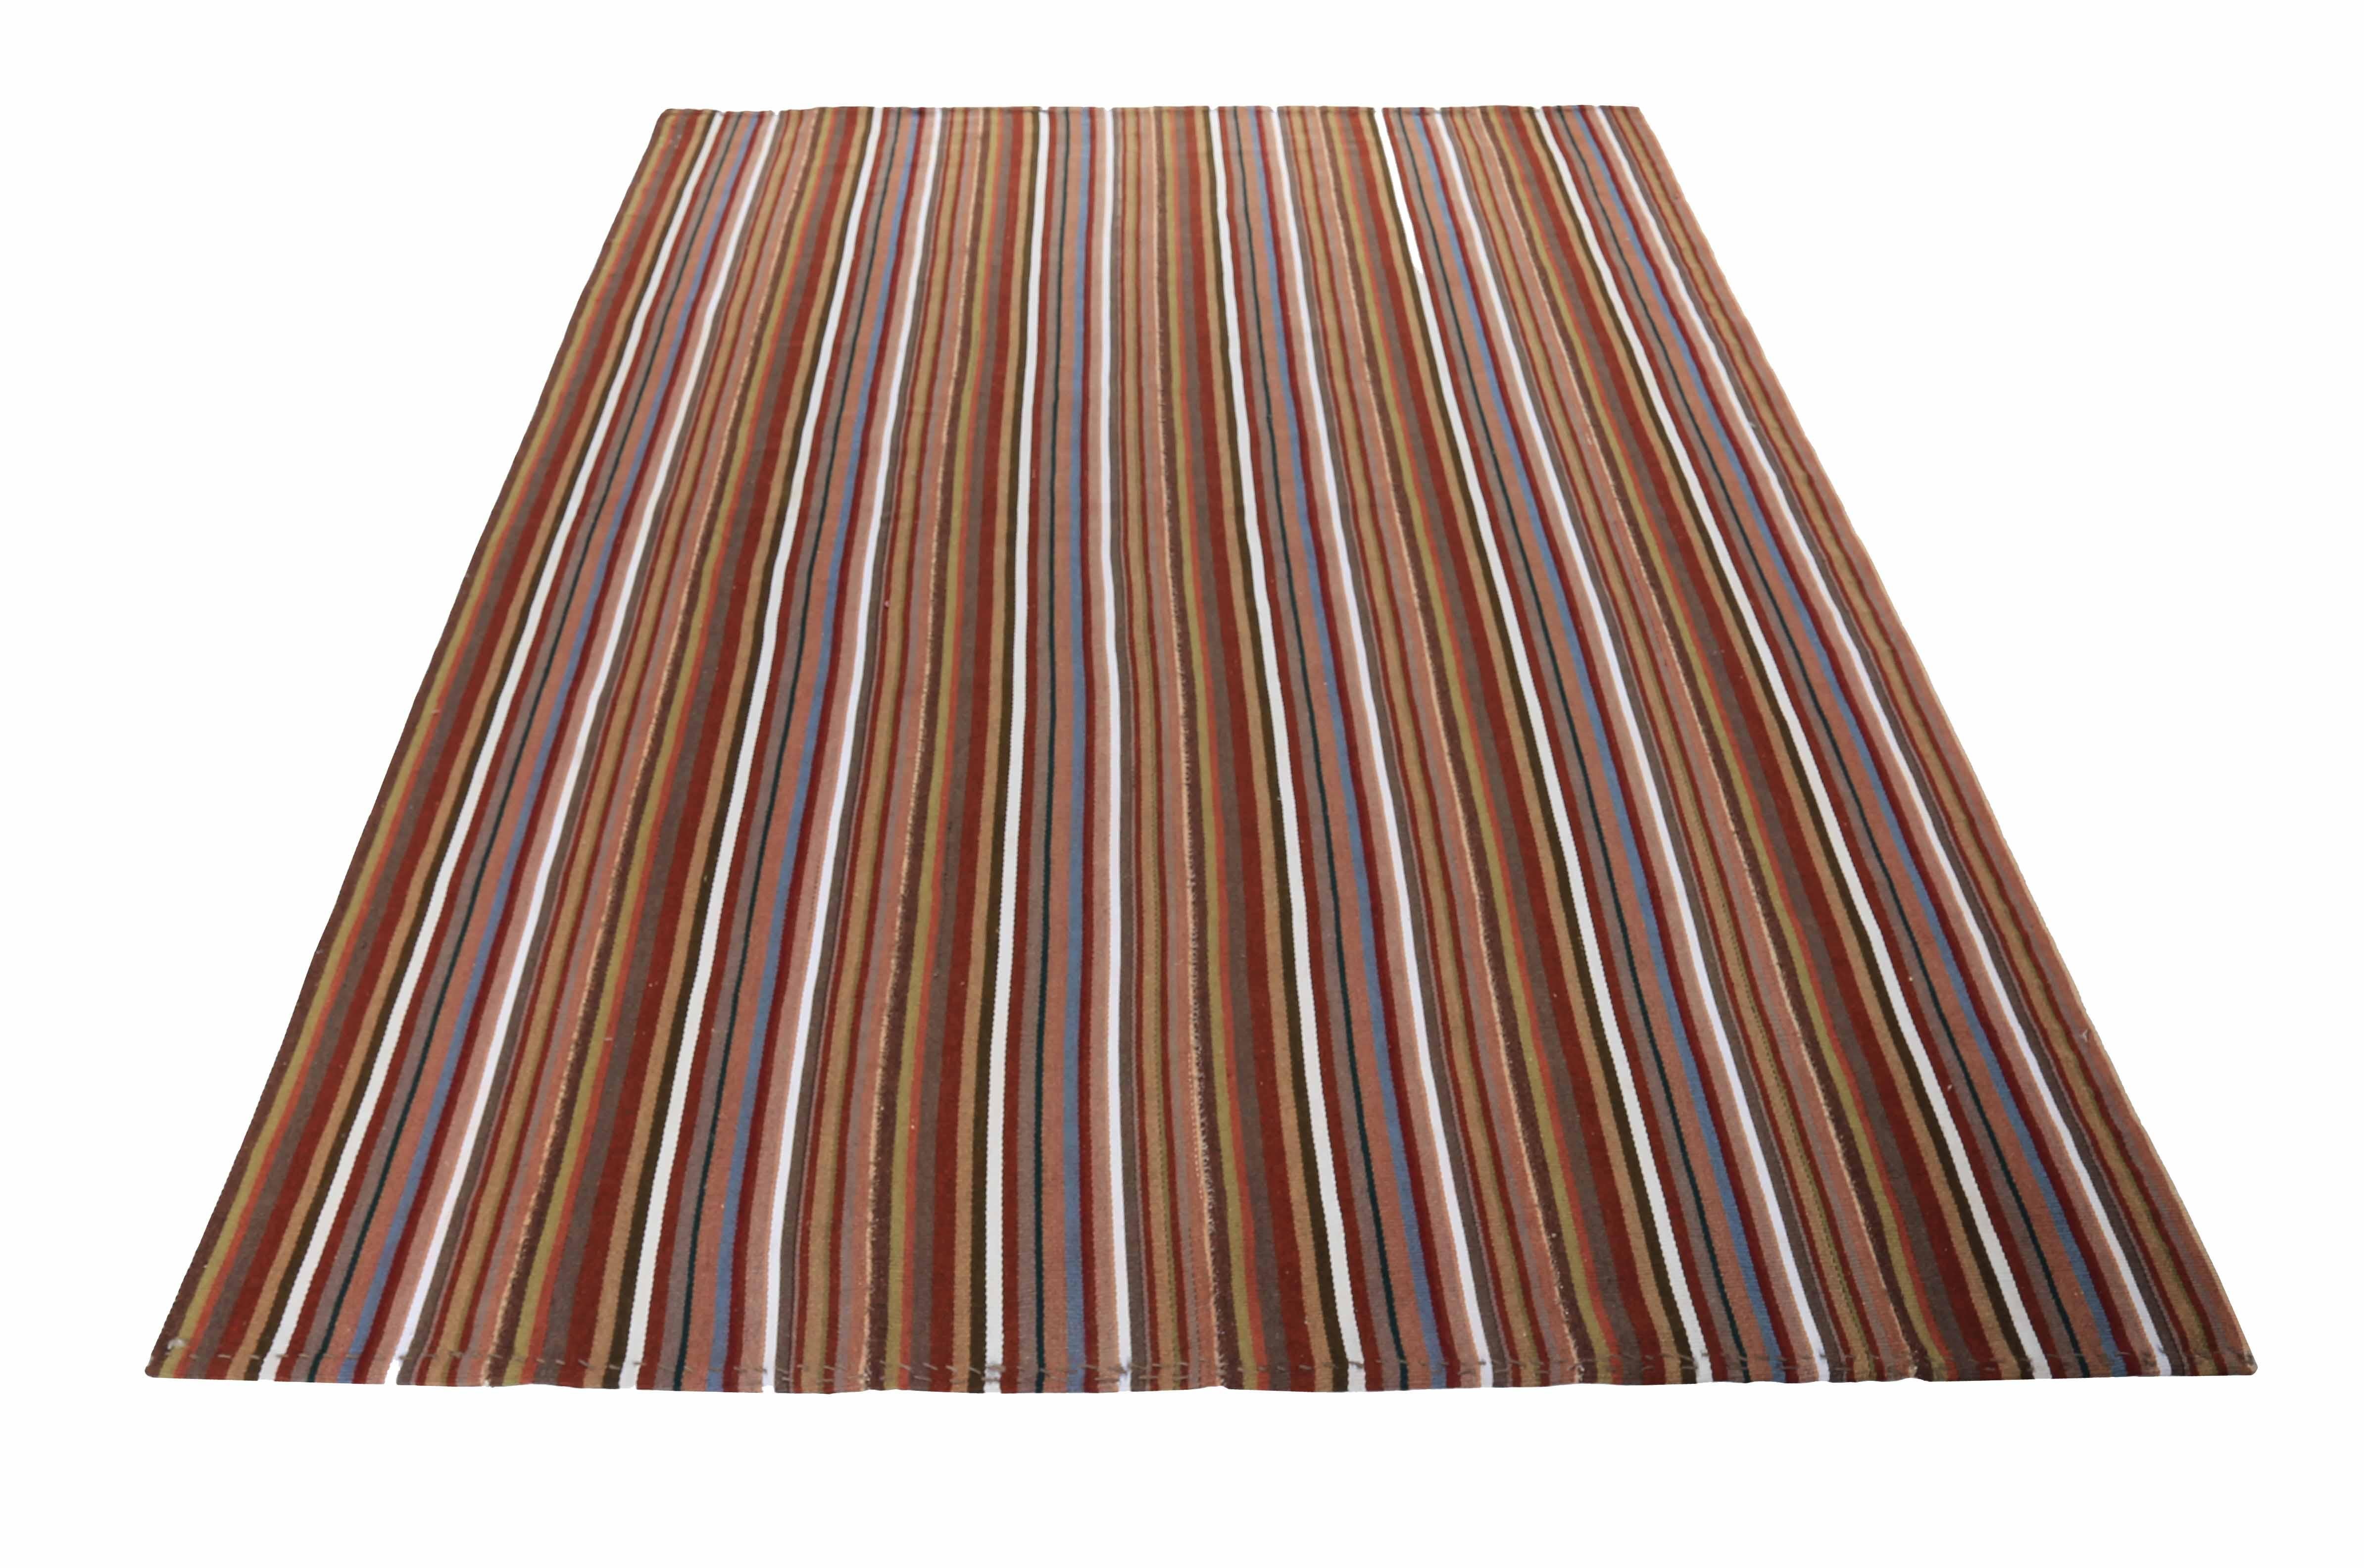 Modern Turkish rug handwoven from the finest sheep’s wool and colored with all-natural vegetable dyes that are safe for humans and pets. It’s a traditional Kilim flat-weave design featuring brown, gray, and white stripes. It’s a stunning piece to